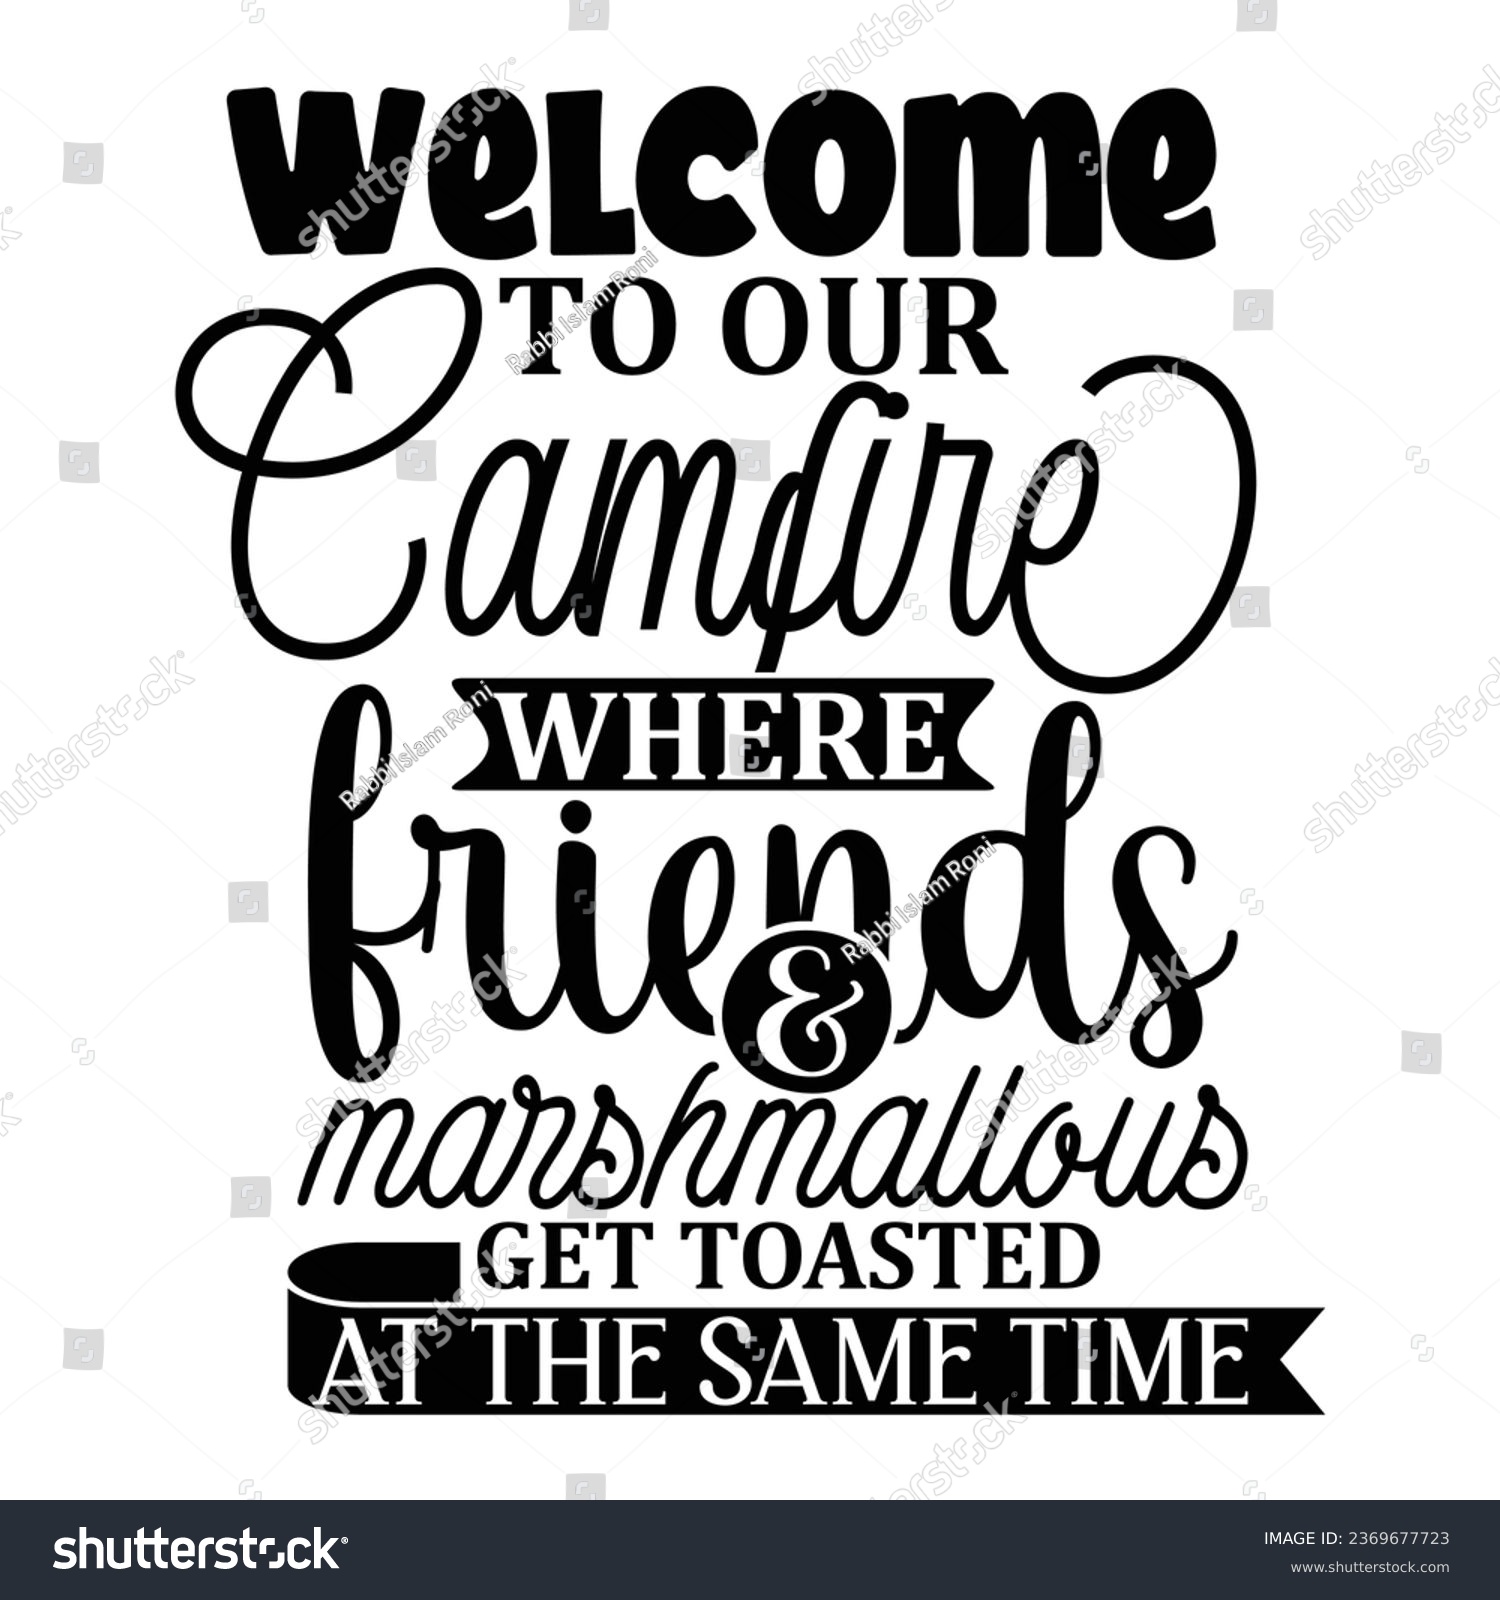 SVG of Welcome to our camfire where friends and marshmallous get toasted at the same time, T-Shirt Design Vector File. svg